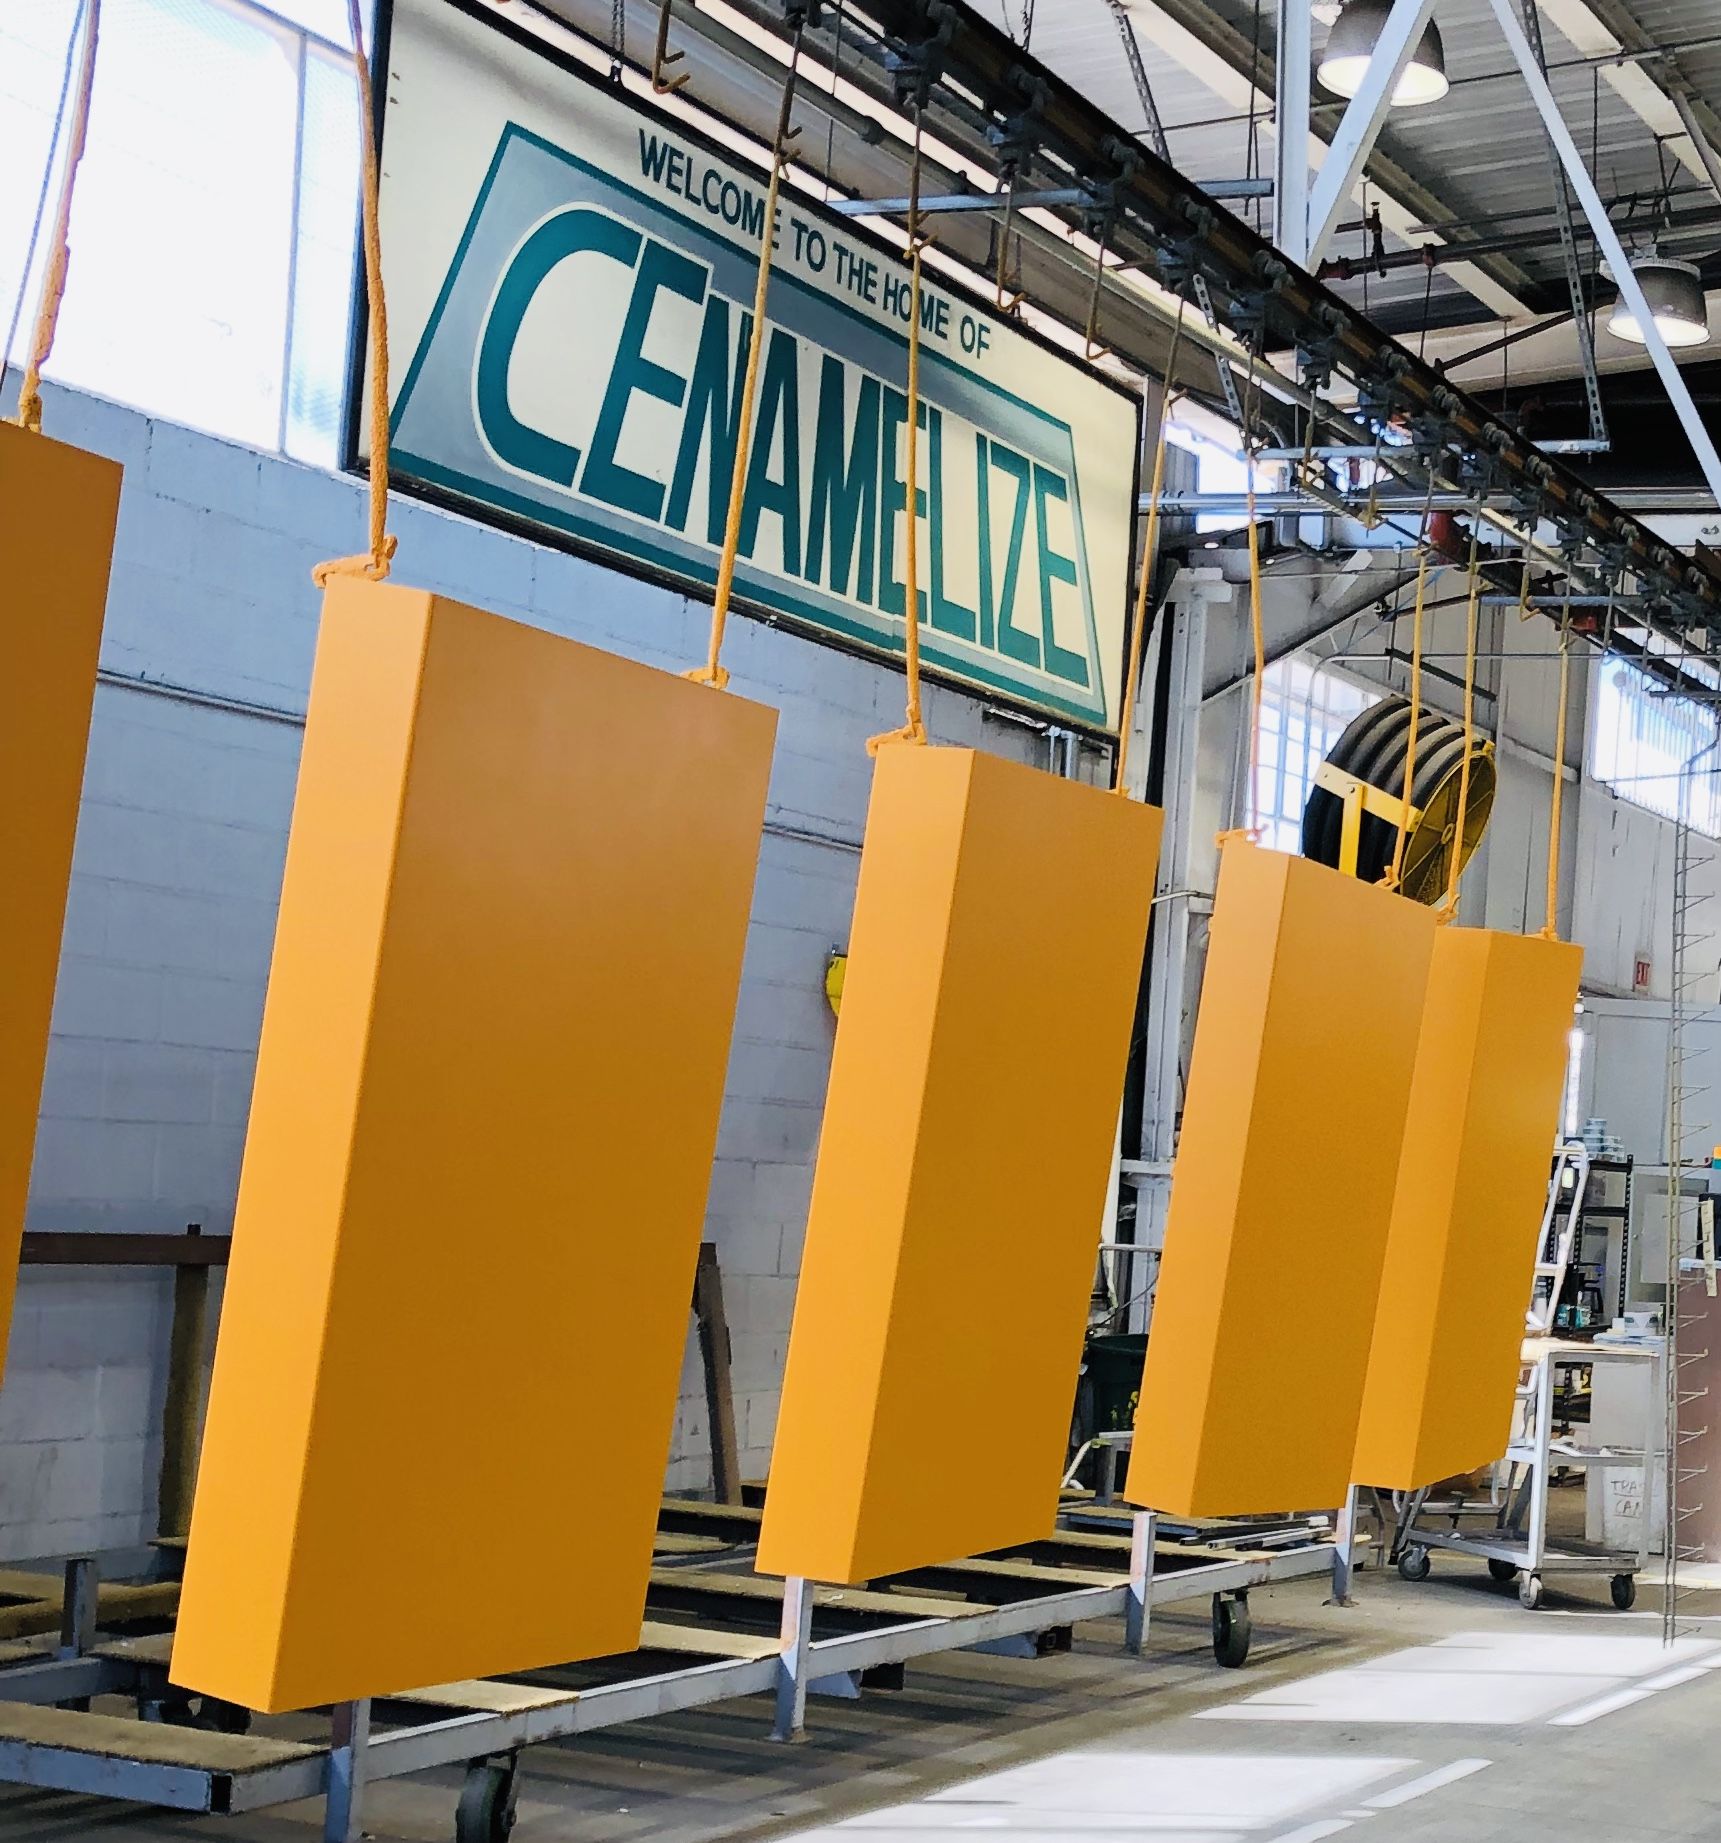 The interior of the Certified Enameling, Inc. facility with yellow-coated panels drying under a sign that says, "Welcome to the home of Cenamelize"